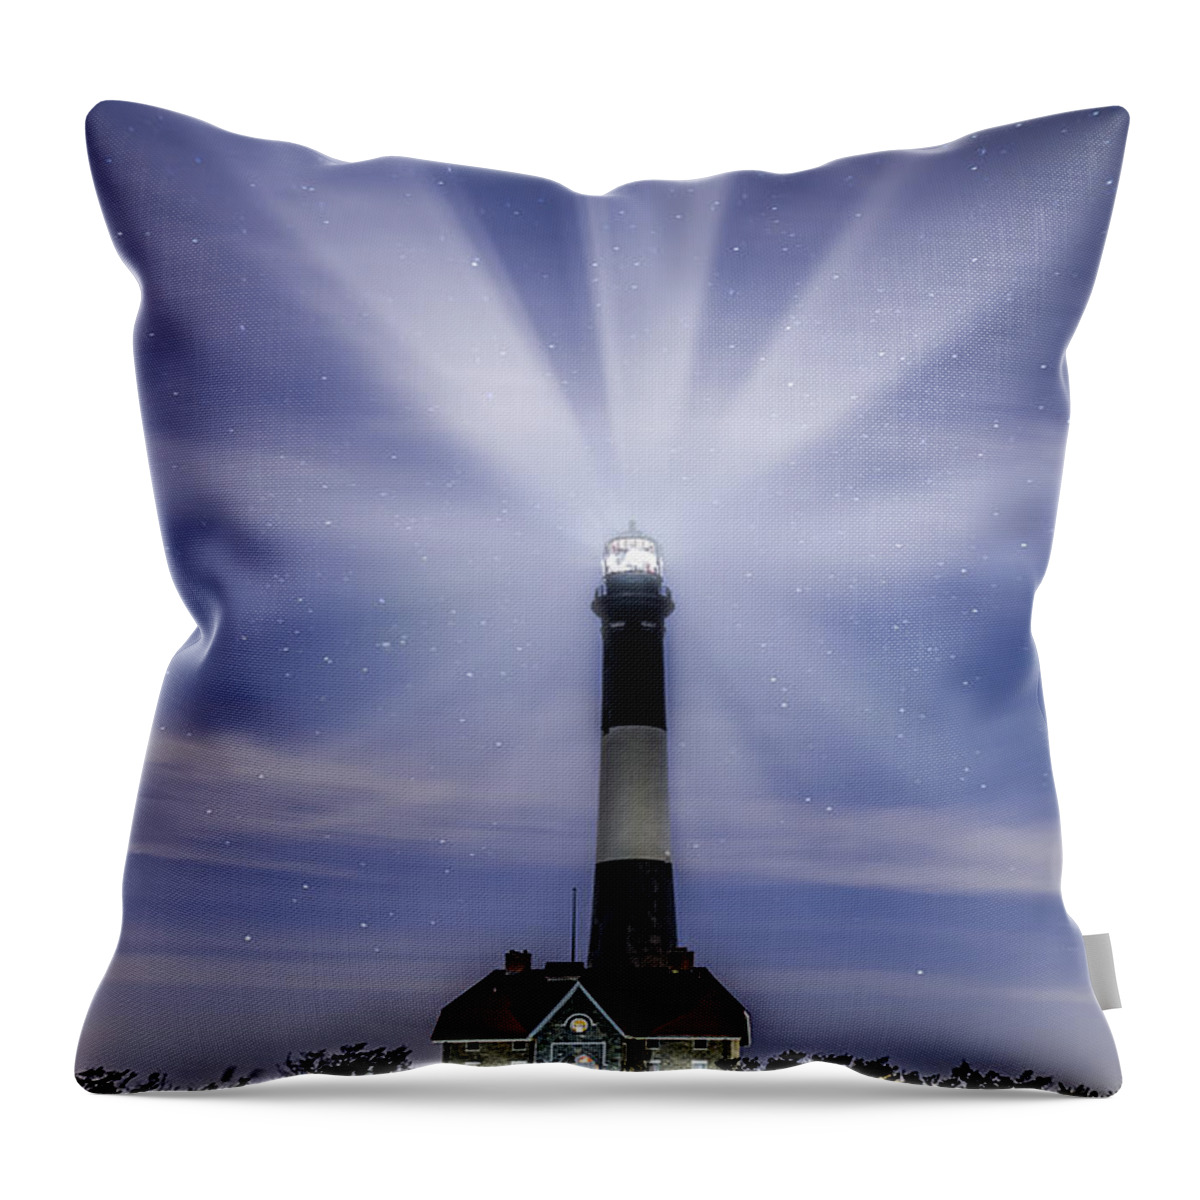 Fire Island Light Throw Pillow featuring the photograph Fire Island Lighthouse Twilight by Susan Candelario